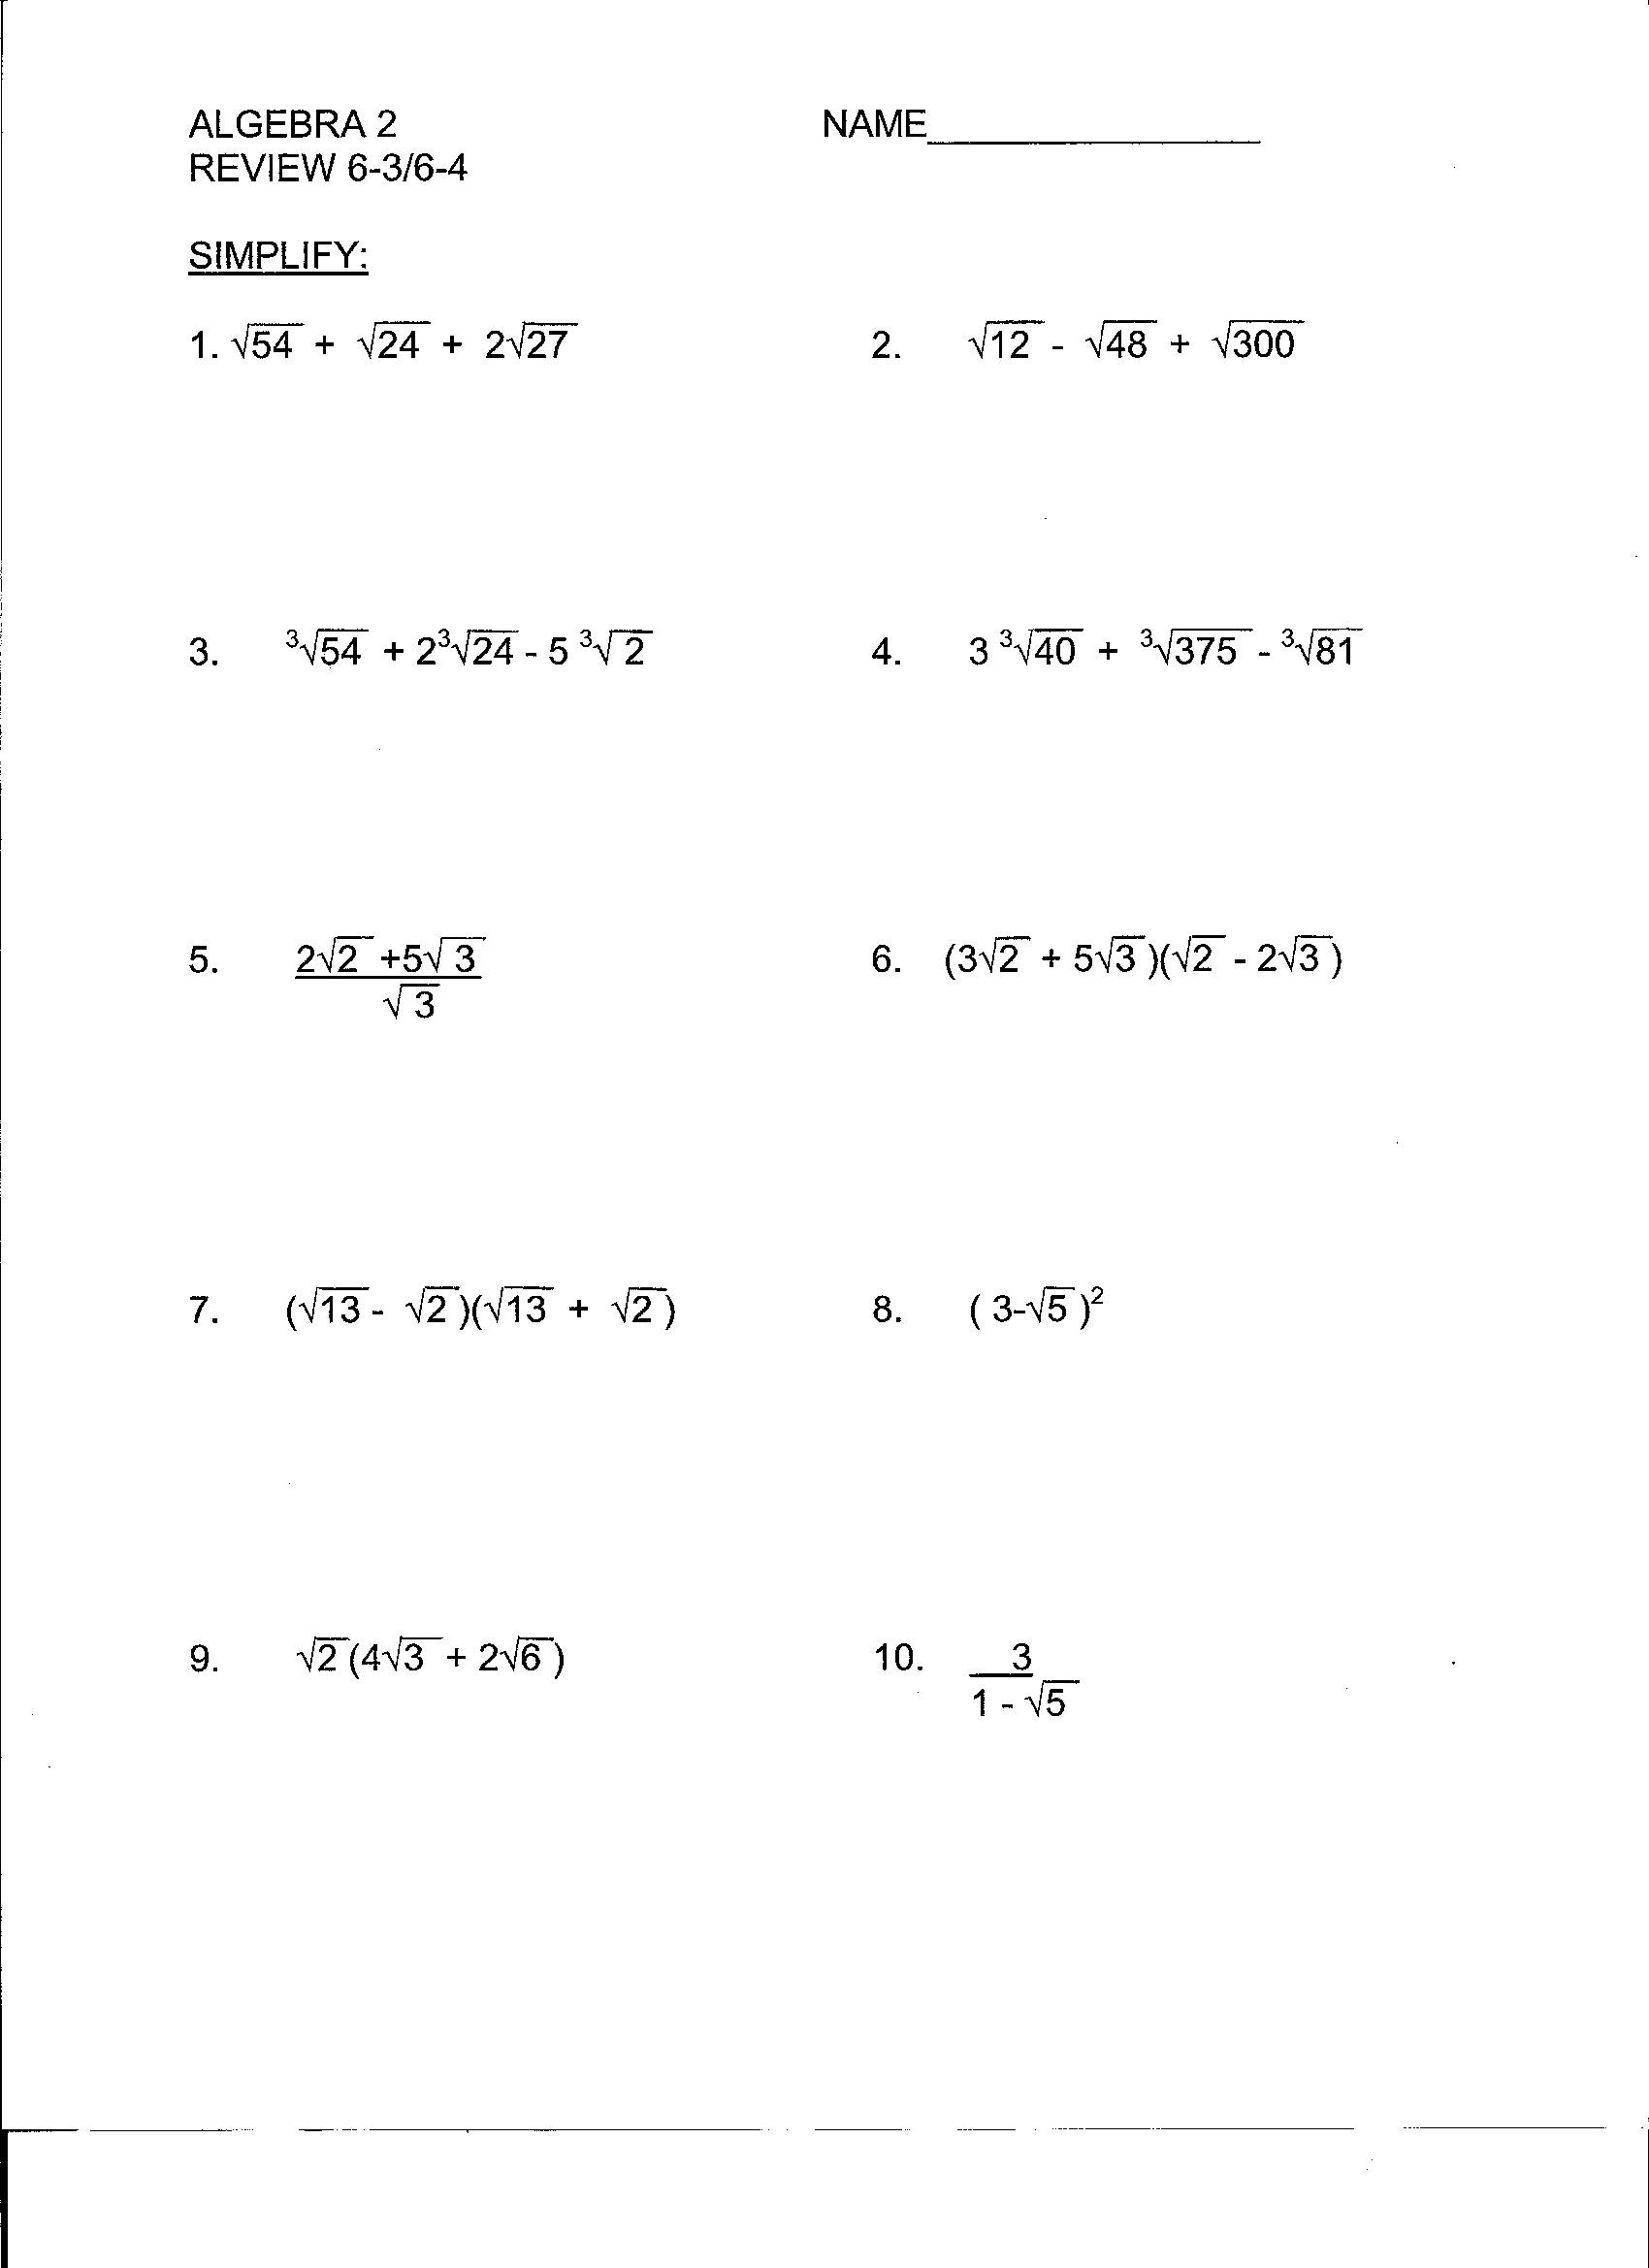 Solving Equations and Inequalities Worksheet solving Equations and Inequalities Review Worksheet Answers